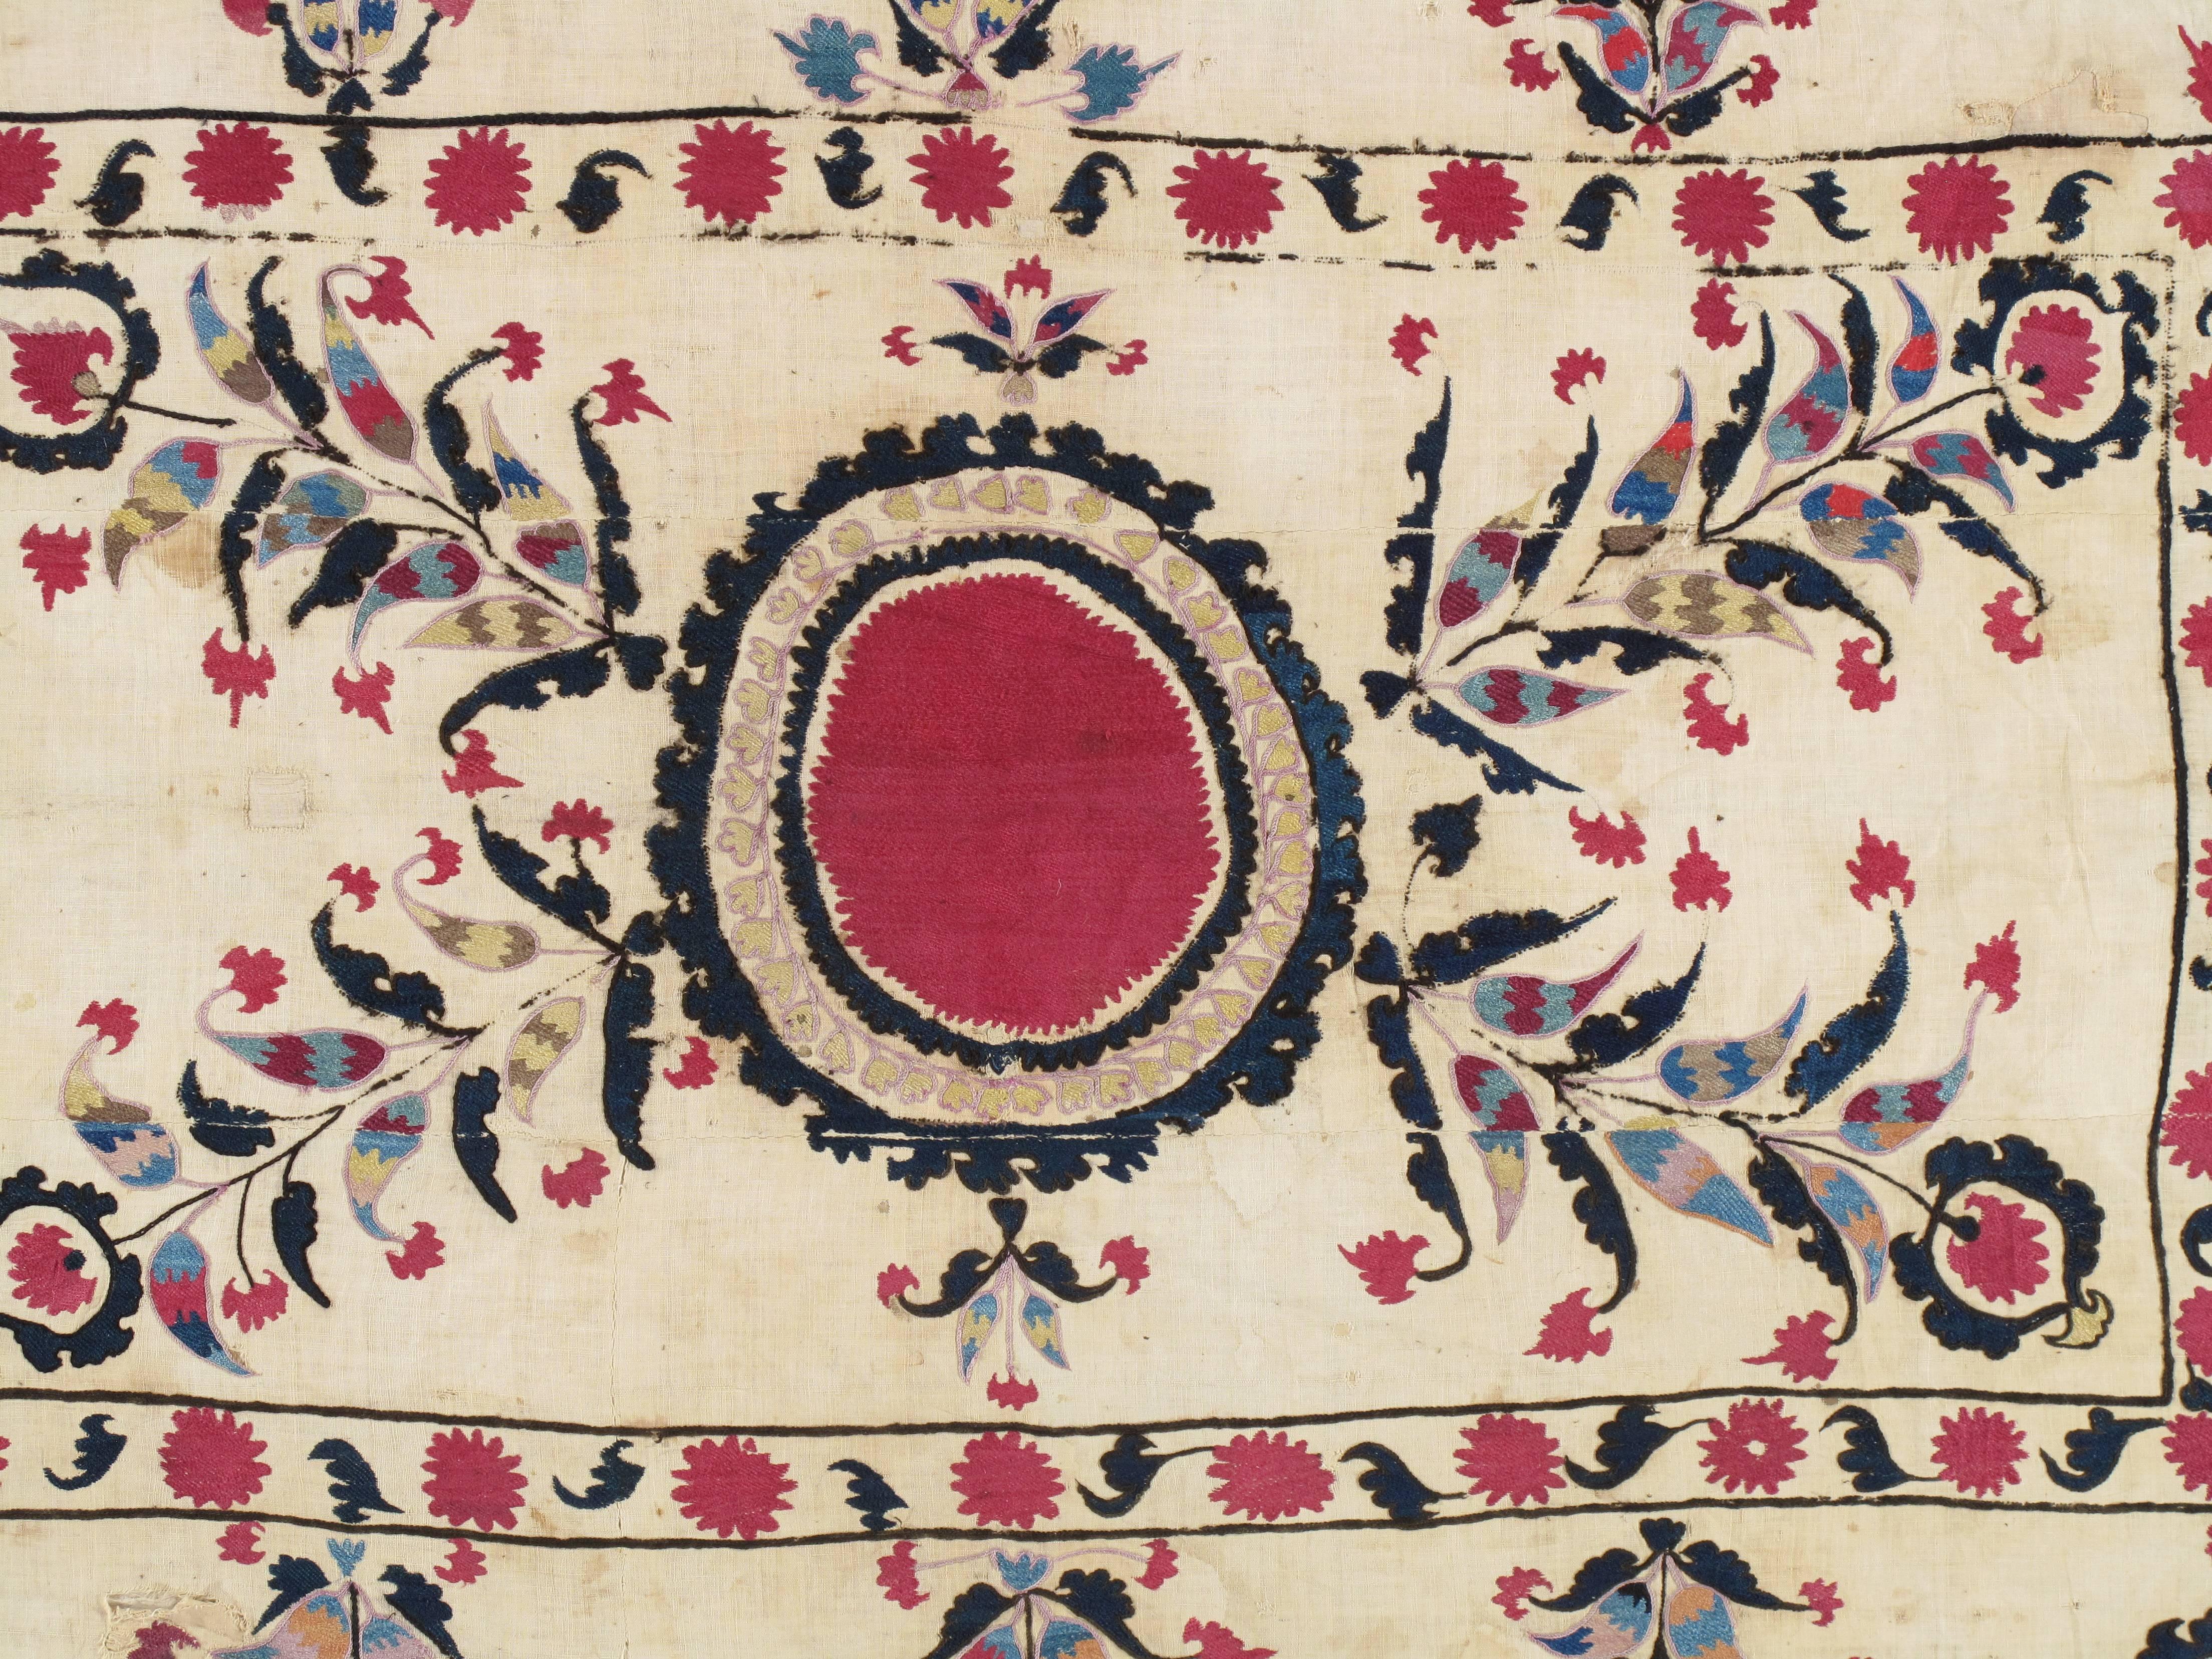 Museum quality silk-on-cotton-ground antique Suzani with hand-embroidery. Fine floral design. This Suzani embroidery has the most noticeable, soporific color pallet. Very fine, 19th century Suzani textile. Beautiful early piece. With vibrant silk